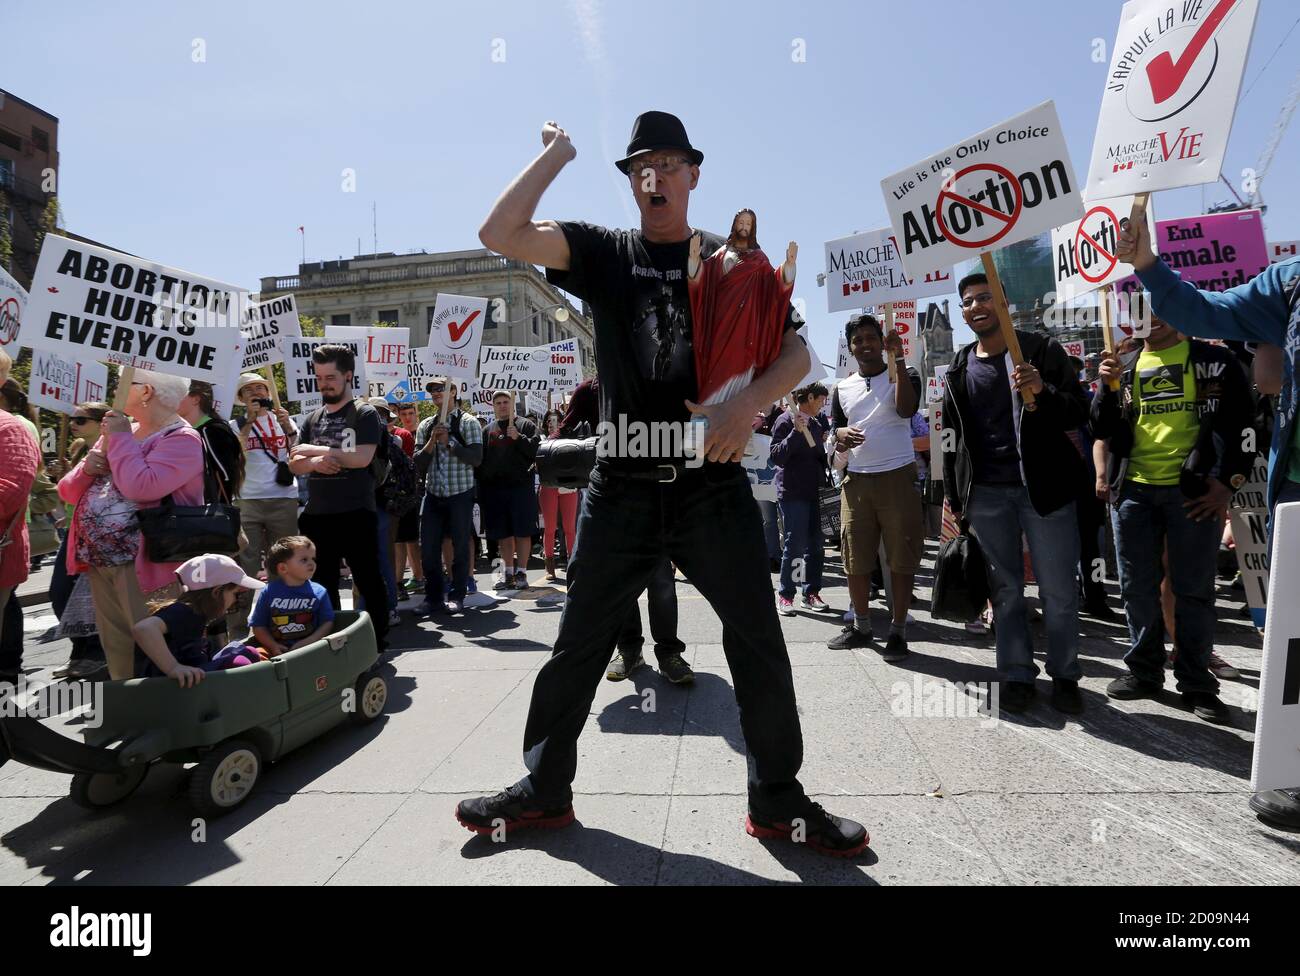 Andre Levesque dances while holding a statue of Jesus during an anti-abortion protest in Ottawa May 14, 2015. REUTERS/Chris Wattie Stock Photo